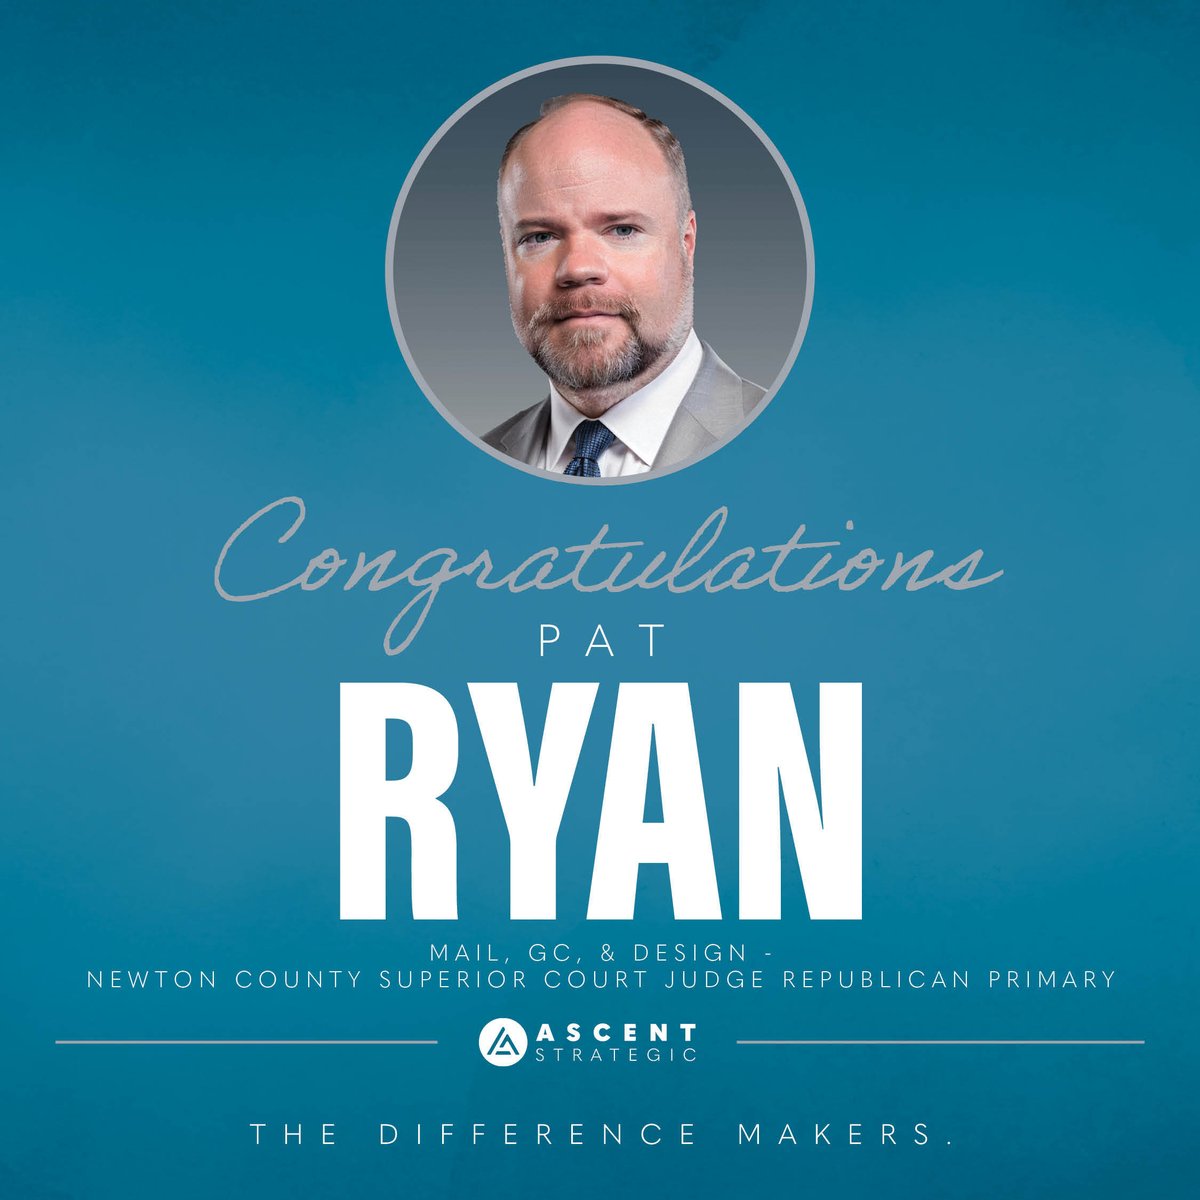 Congratulations, Pat Ryan, on your election as the republican nominee for Indiana's Newton County Superior Court Judge! We were proud to be an integral part of your team and look forward to working with you again in the future.